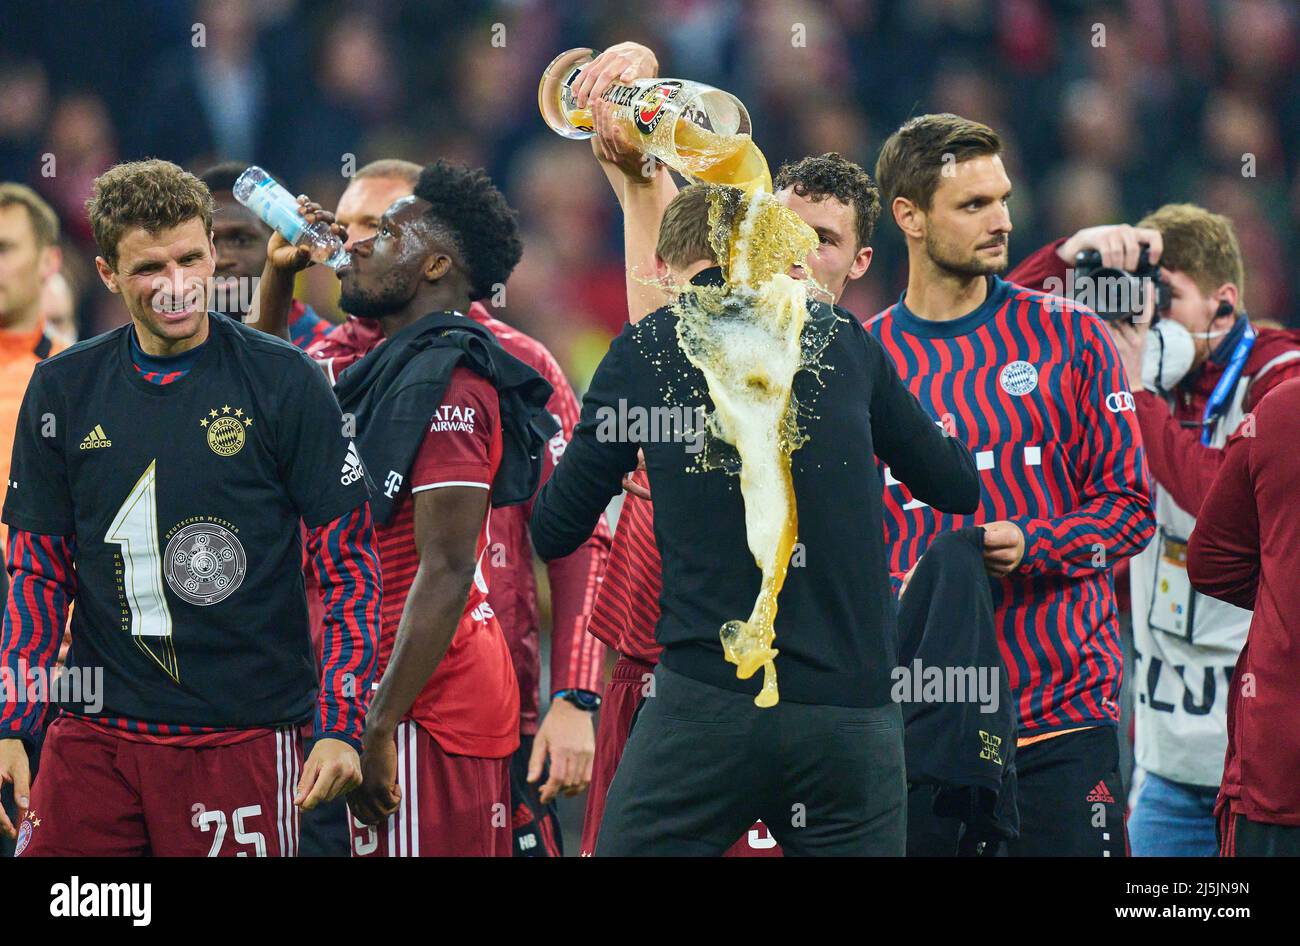 Benjamin PAVARD, FCB 5  beer shower for  Trainer Julian Nagelsmann (FCB), team manager, headcoach, coach,  Thomas MUELLER, MÜLLER, FCB 25  Alphonso DAVIES, FCB 19 Sven ULREICH, FCB 26 goalkeeper,   celebration after the match FC BAYERN MÜNCHEN - BORUSSIA DORTMUND 3-1 1.German Football League on April 23, 2022 in Munich, Germany. Season 2021/2022, match day 31, 1.Bundesliga, München, 31.Spieltag. FCB, BVB © Peter Schatz / Alamy Live News    - DFL REGULATIONS PROHIBIT ANY USE OF PHOTOGRAPHS as IMAGE SEQUENCES and/or QUASI-VIDEO - Stock Photo